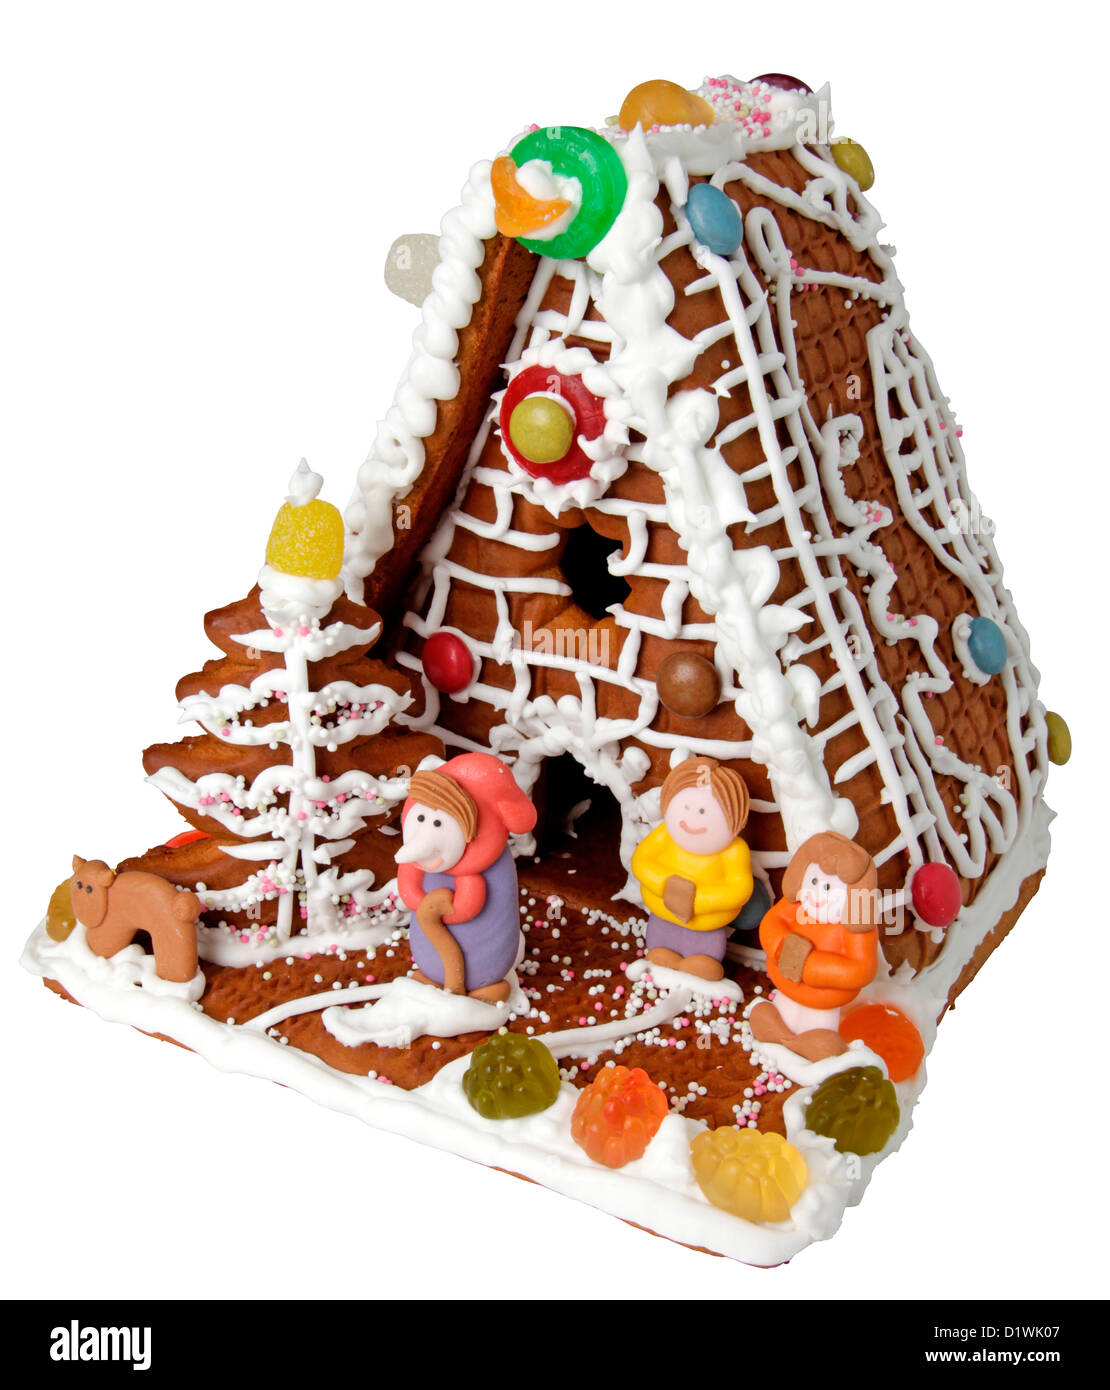 CUT OUT OF GINGERBREAD HOUSE Stock Photo